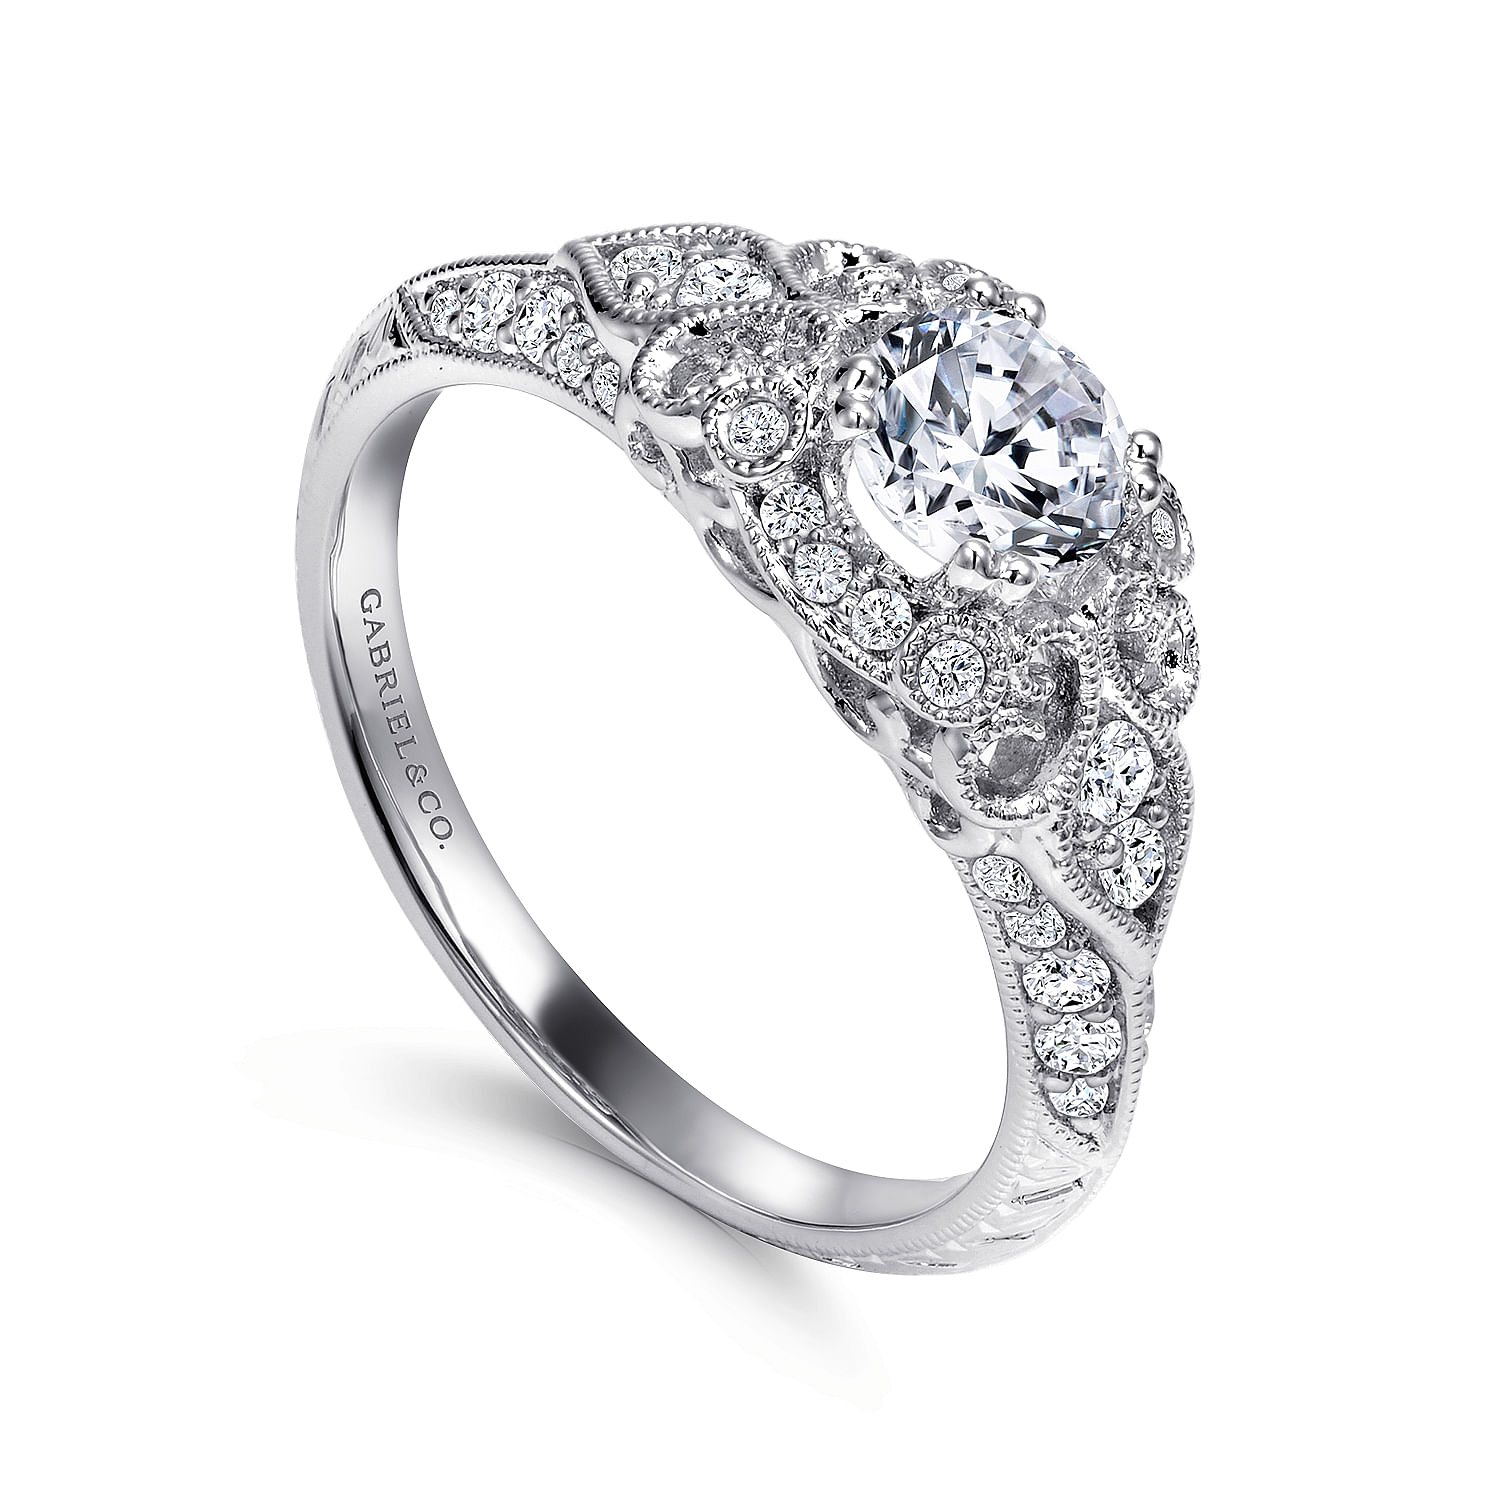 Engagement Rings - Find Your Engagement Rings - Gabriel & Co.